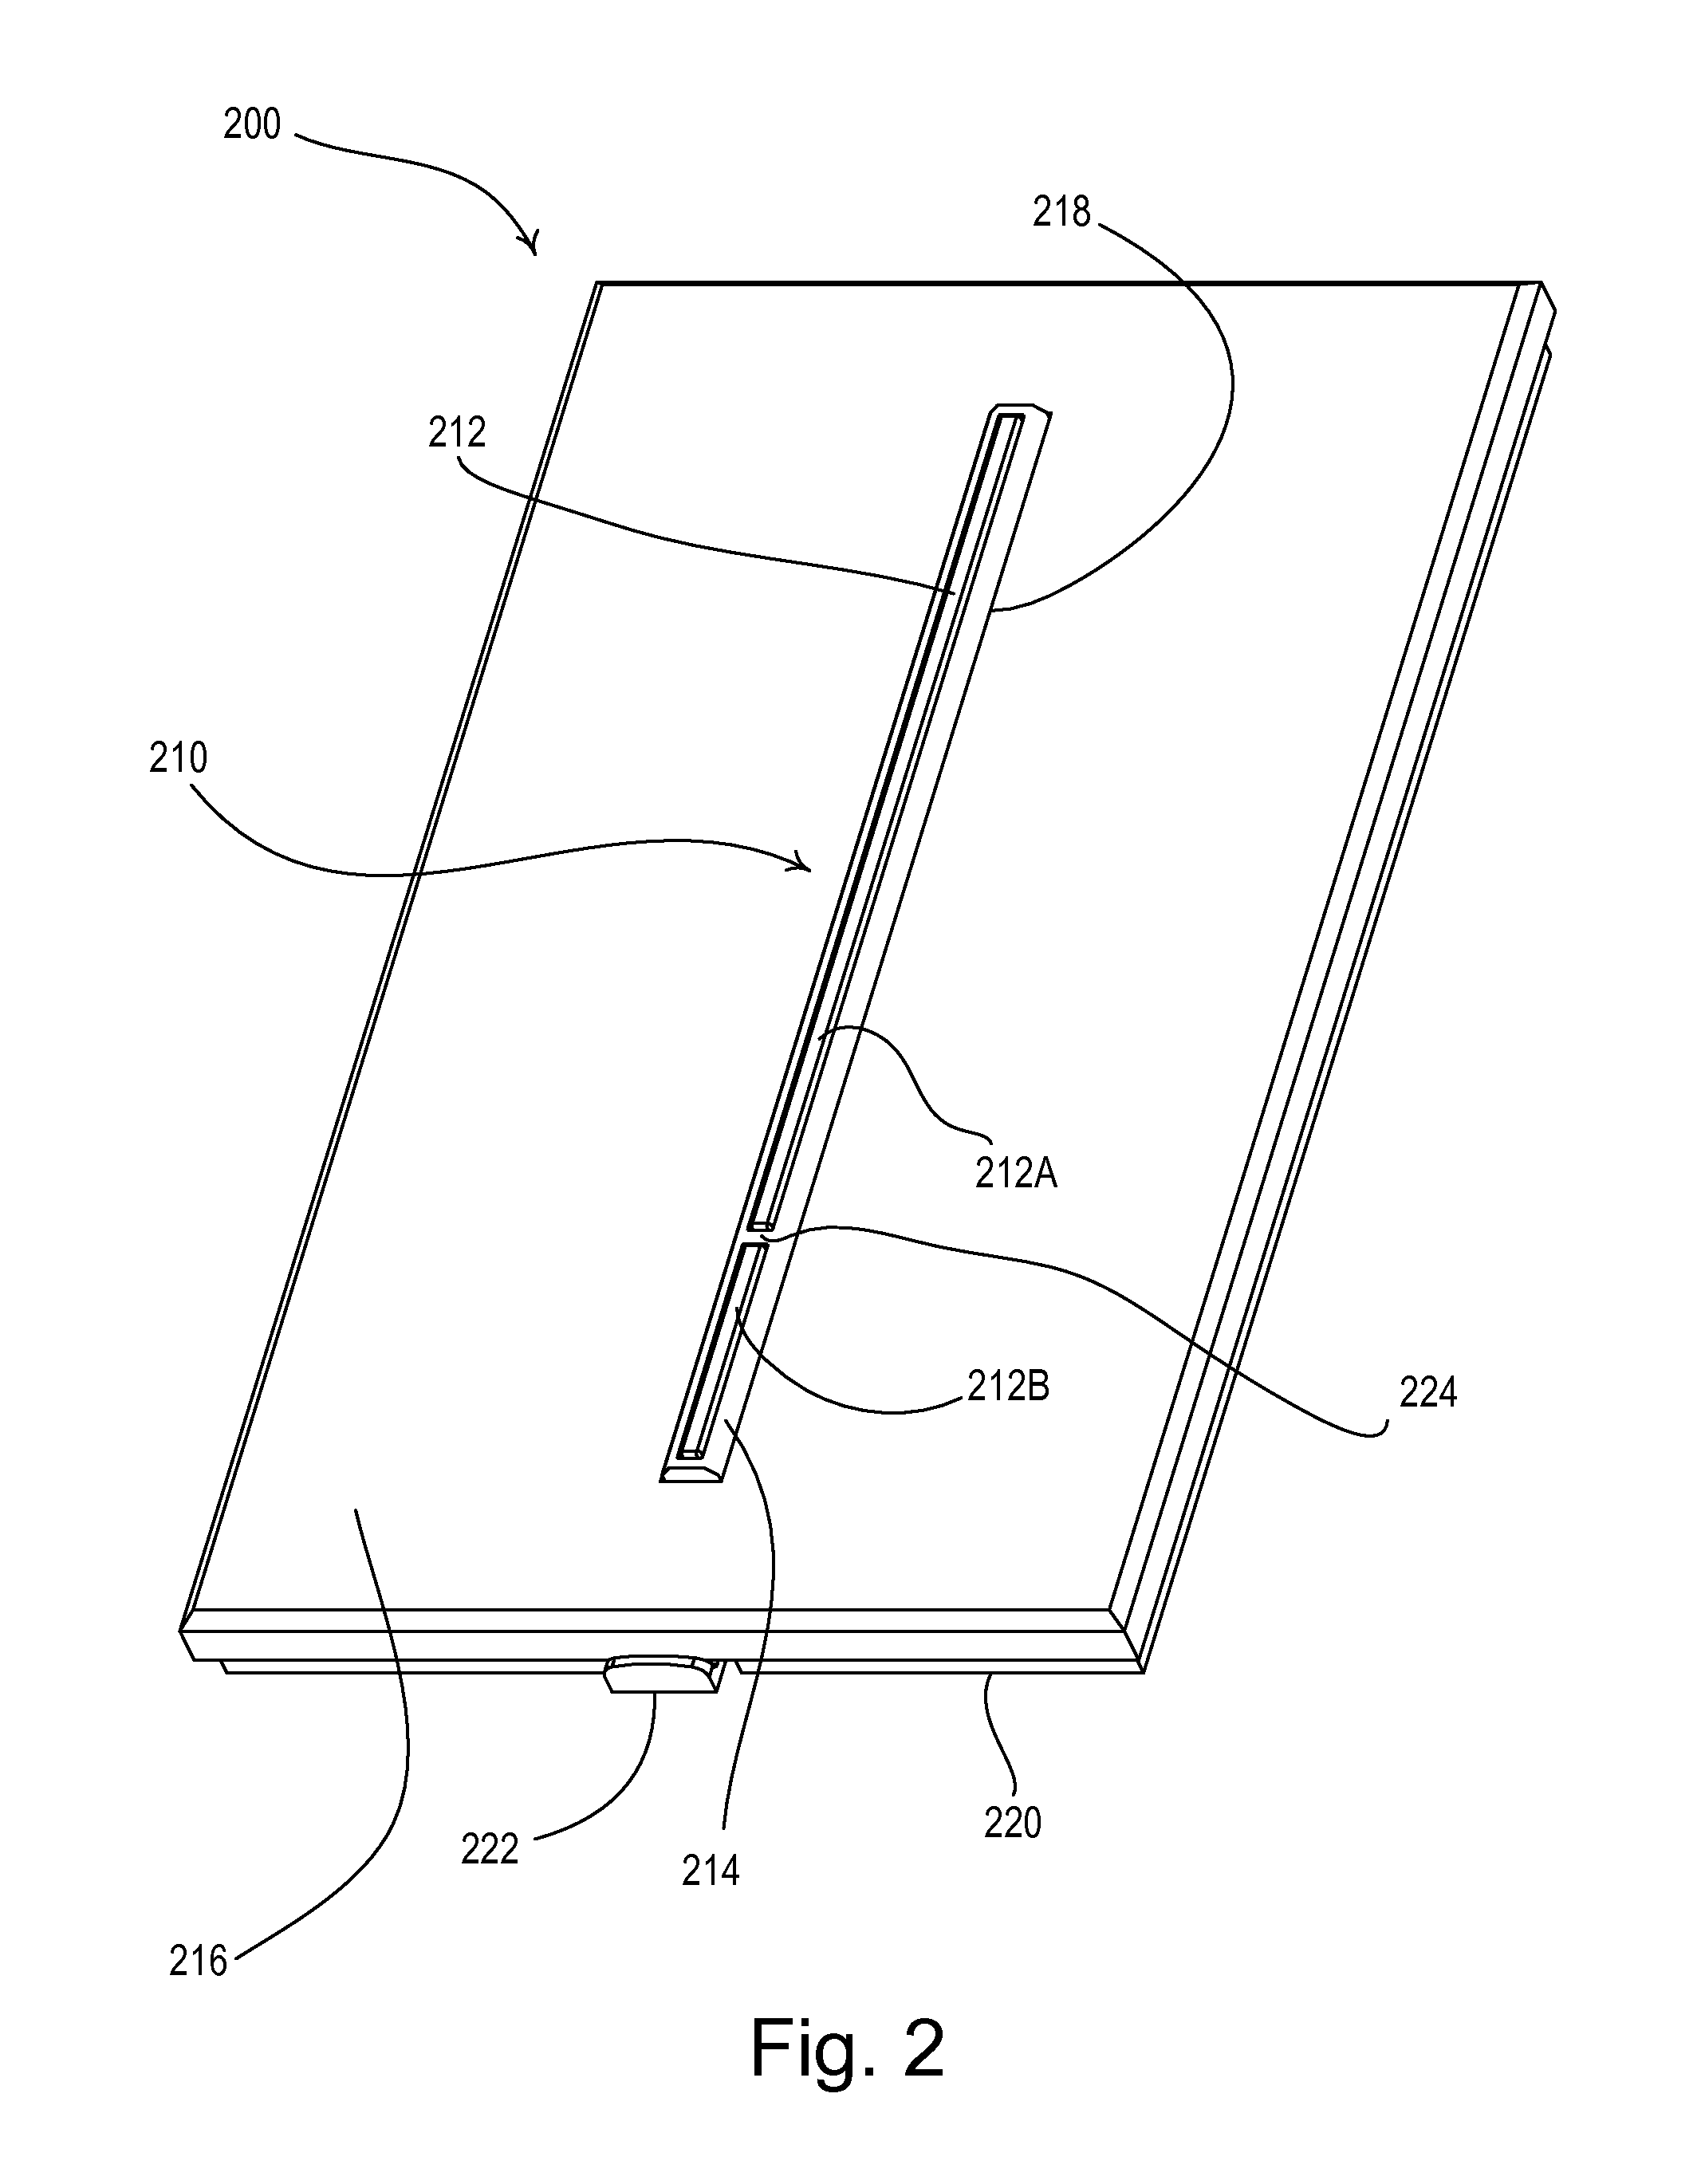 Power Supply for a Load Control Device